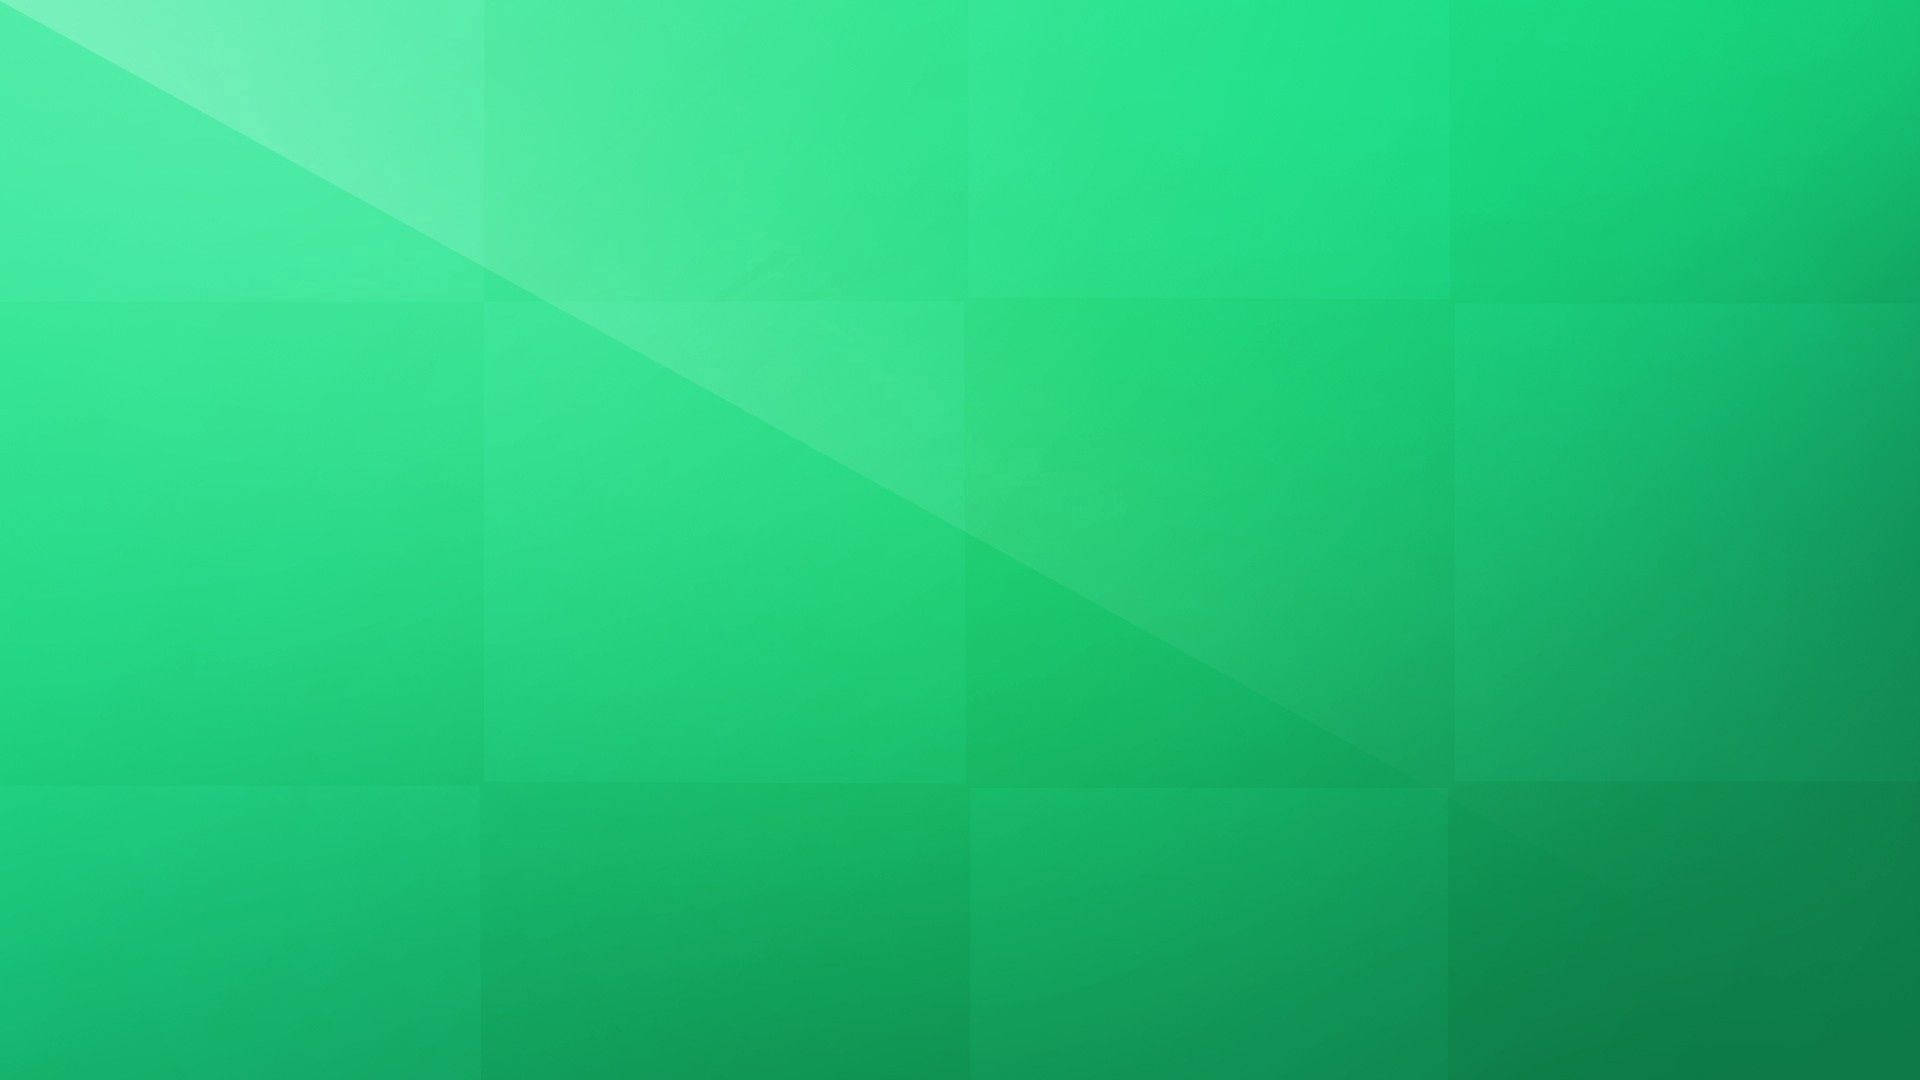 Solid Color 1920X1080 Wallpaper and Background Image